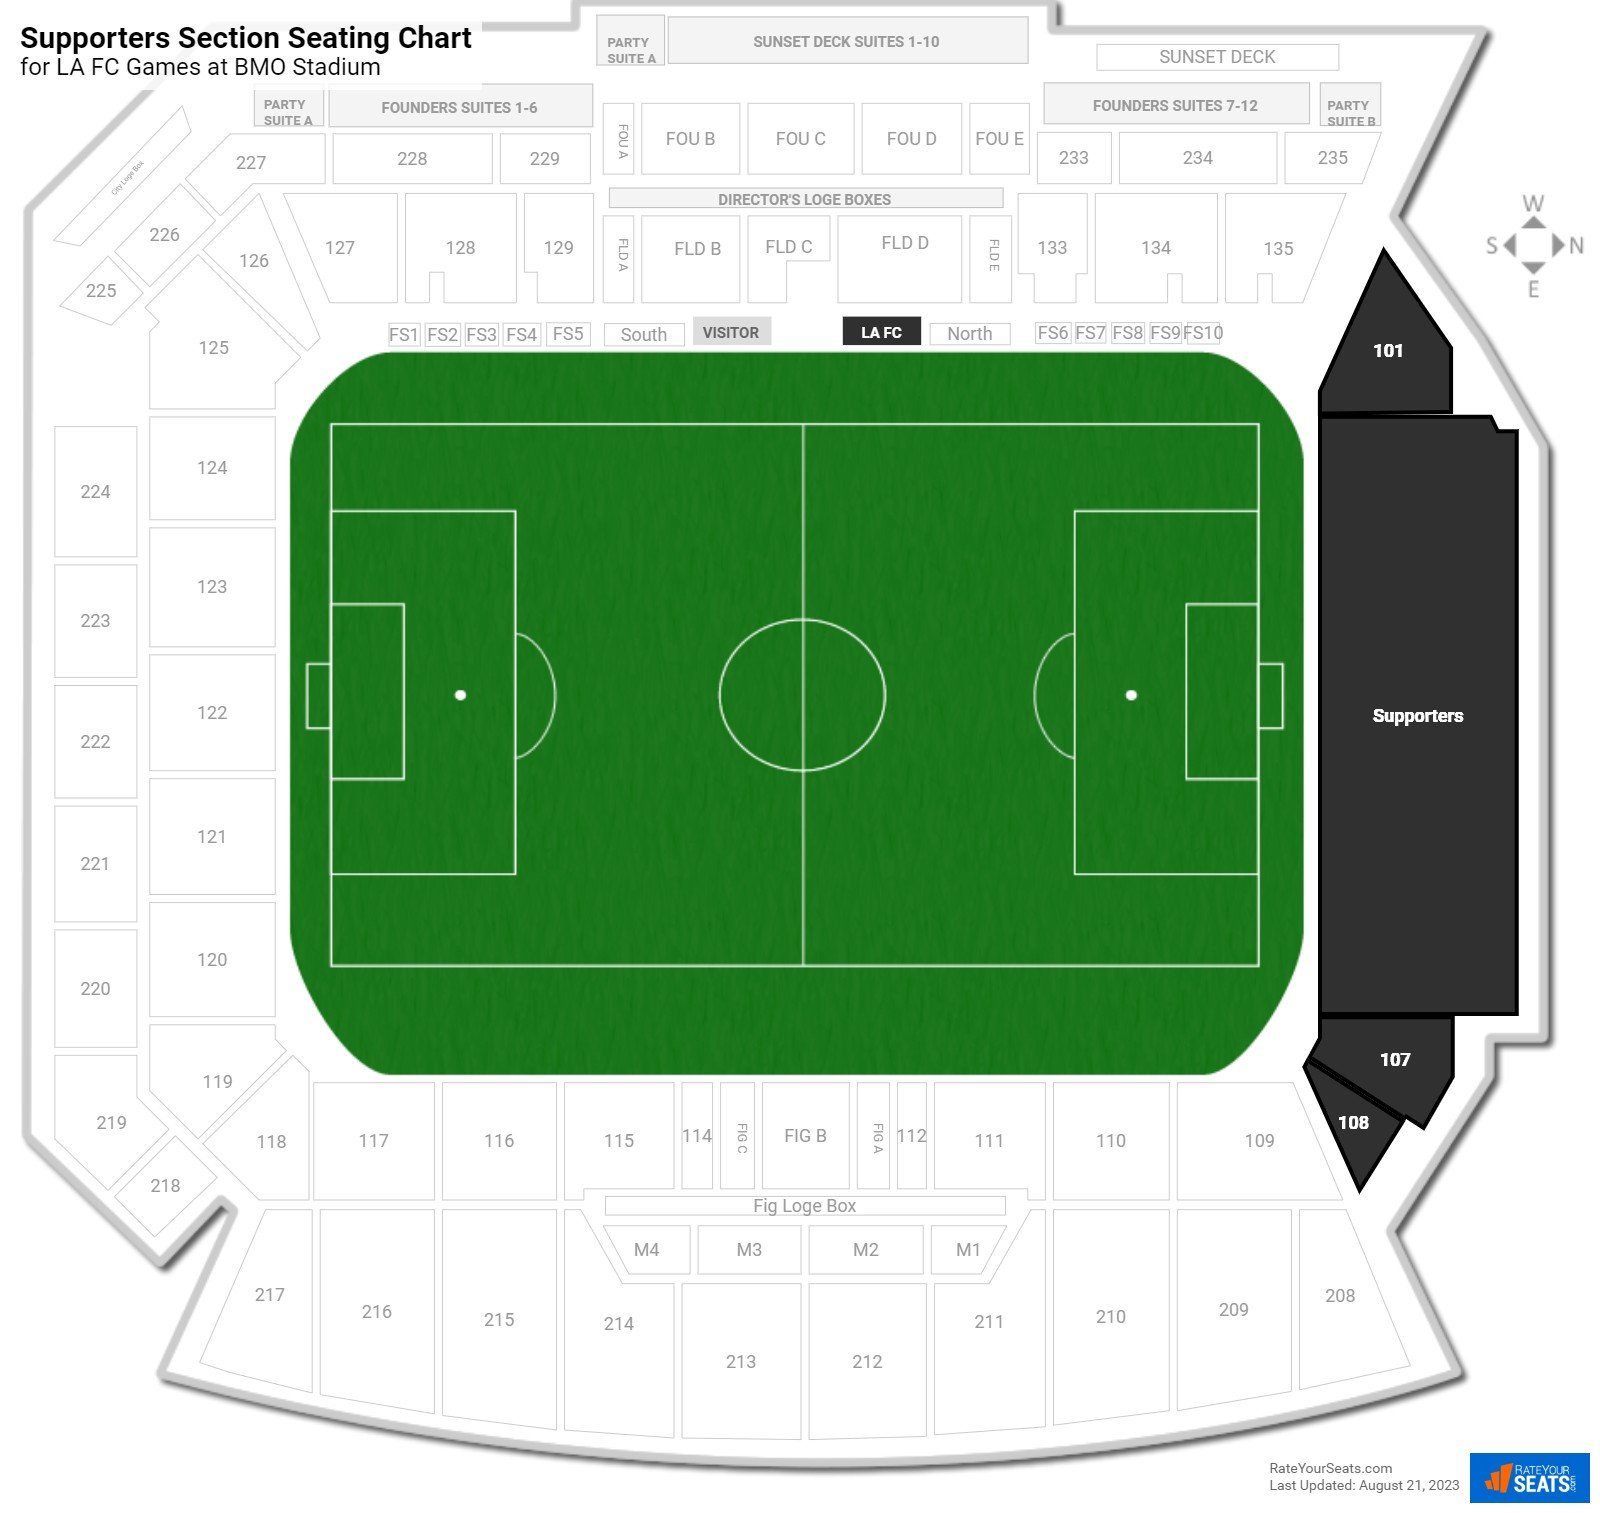 LA FC Supporters Section Seating Chart at BMO Stadium